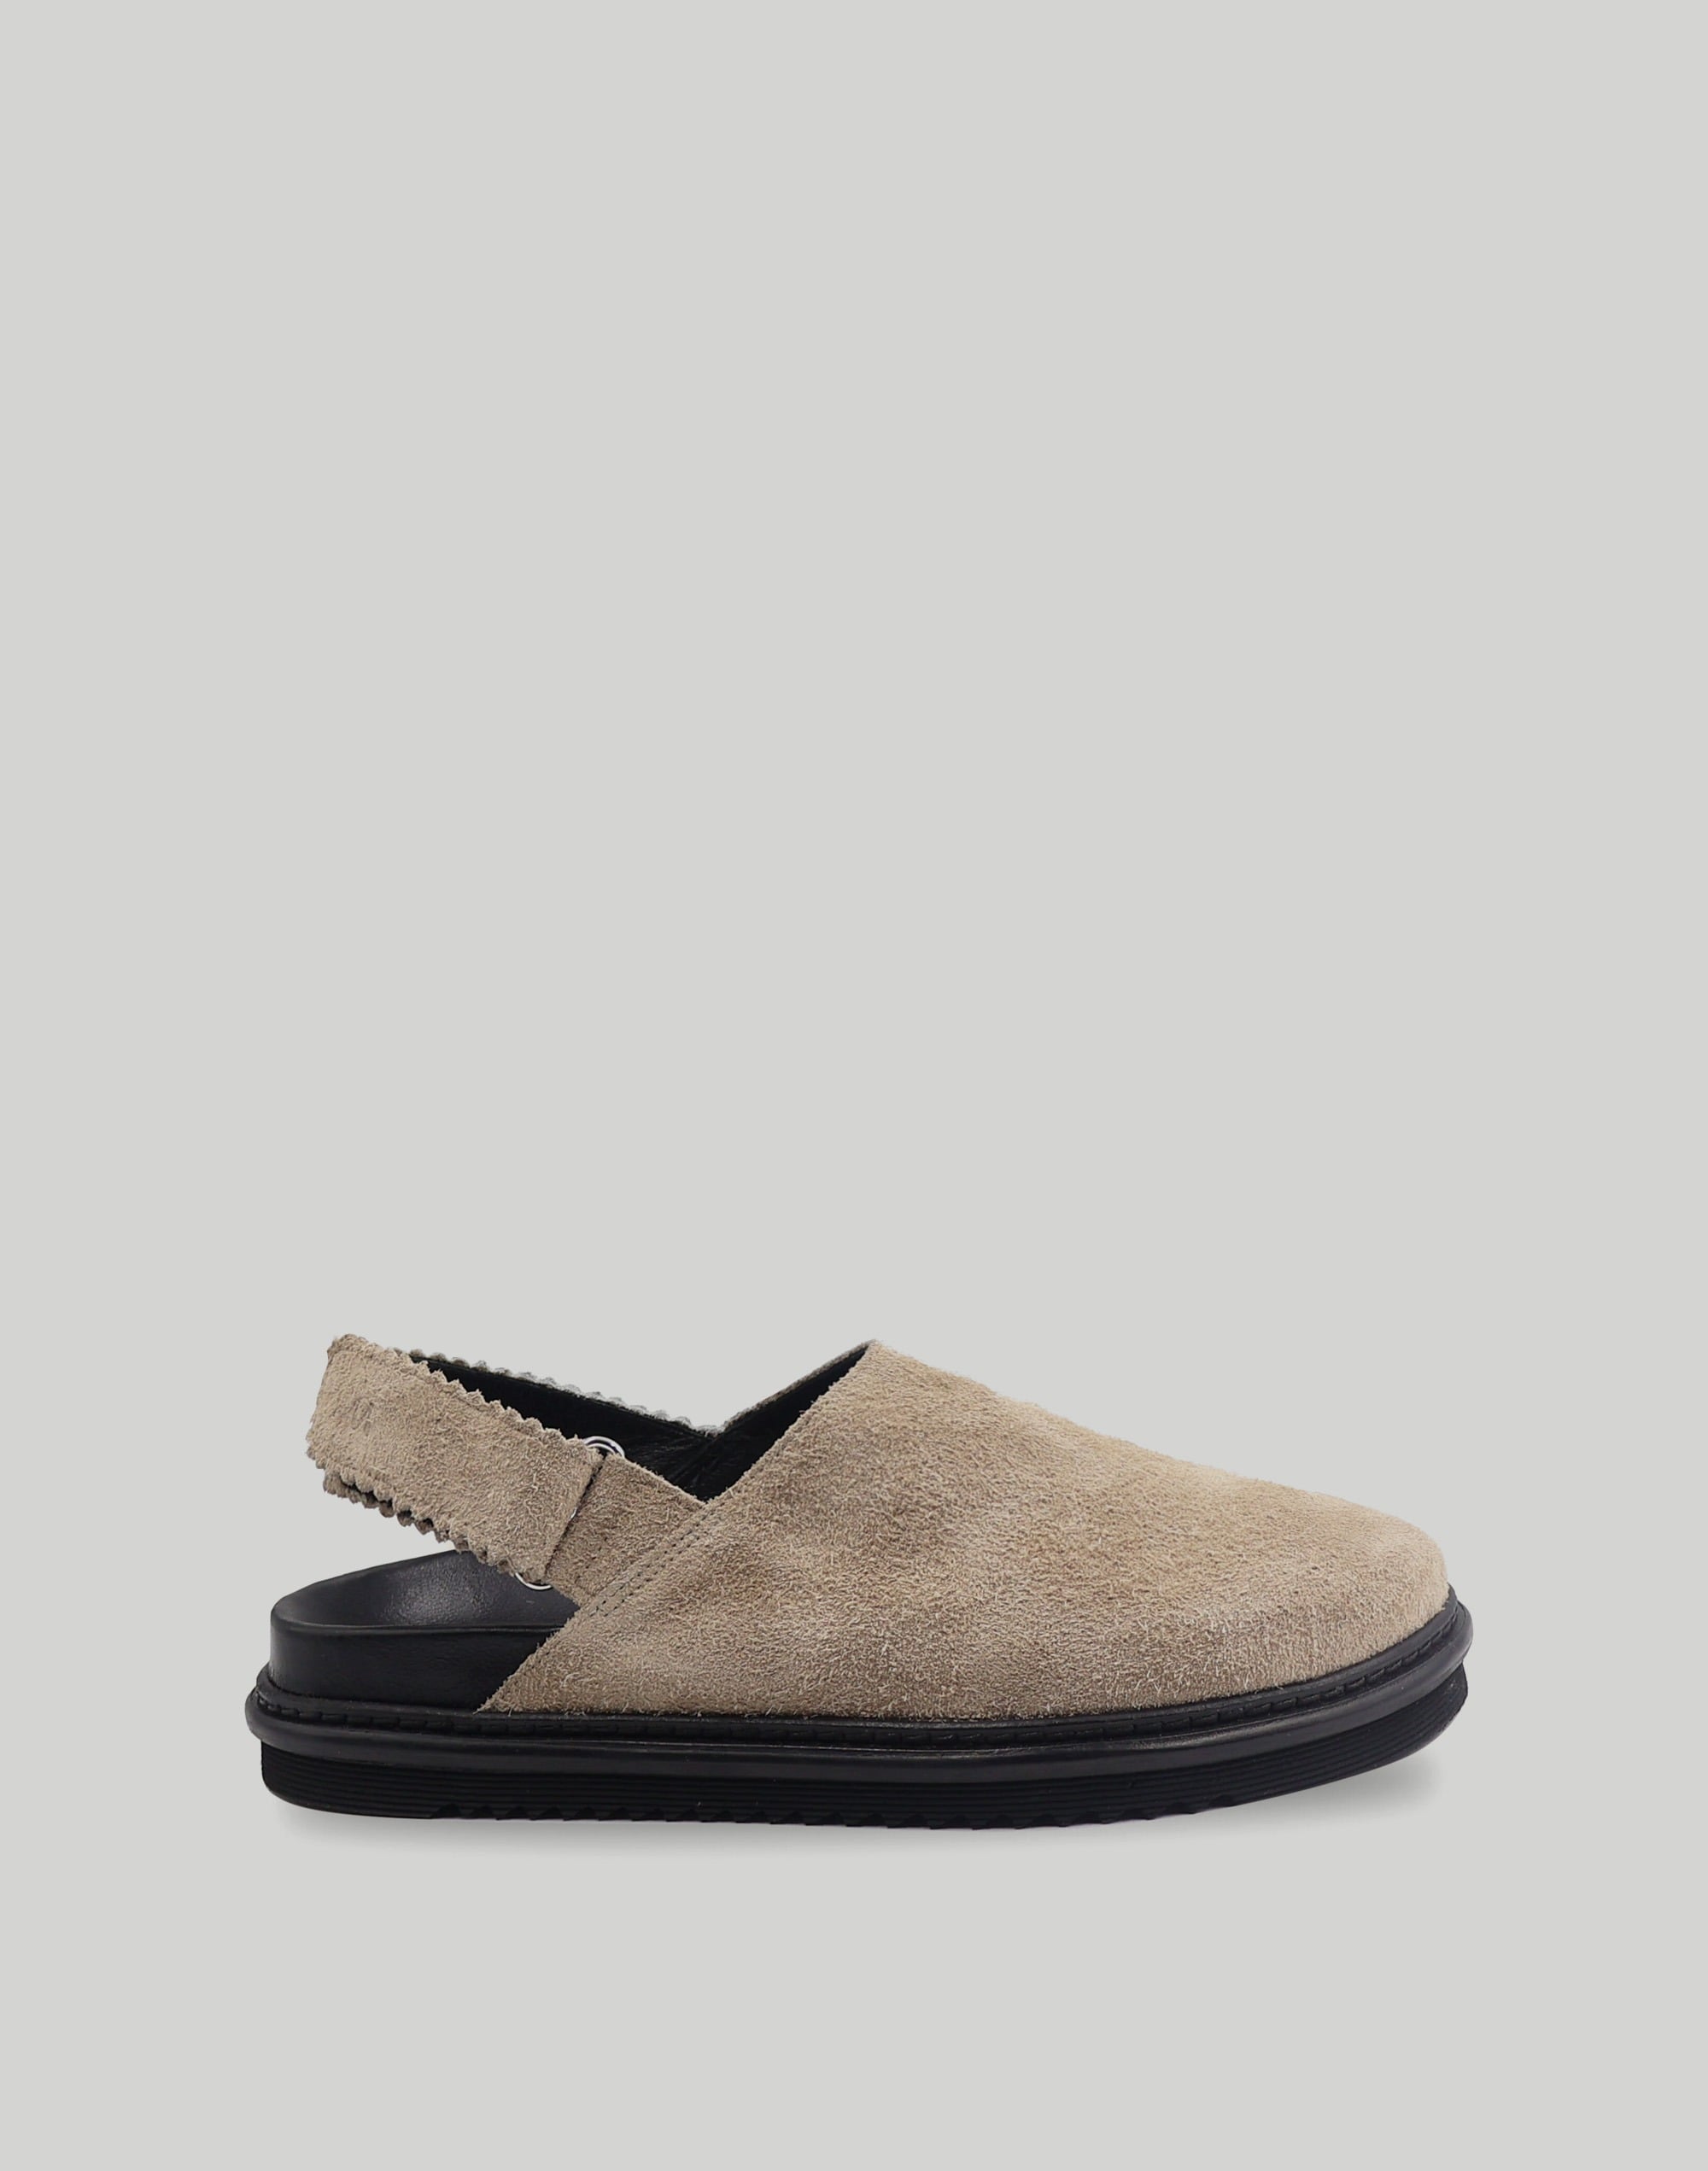 Maguire Torre Taupe Clog